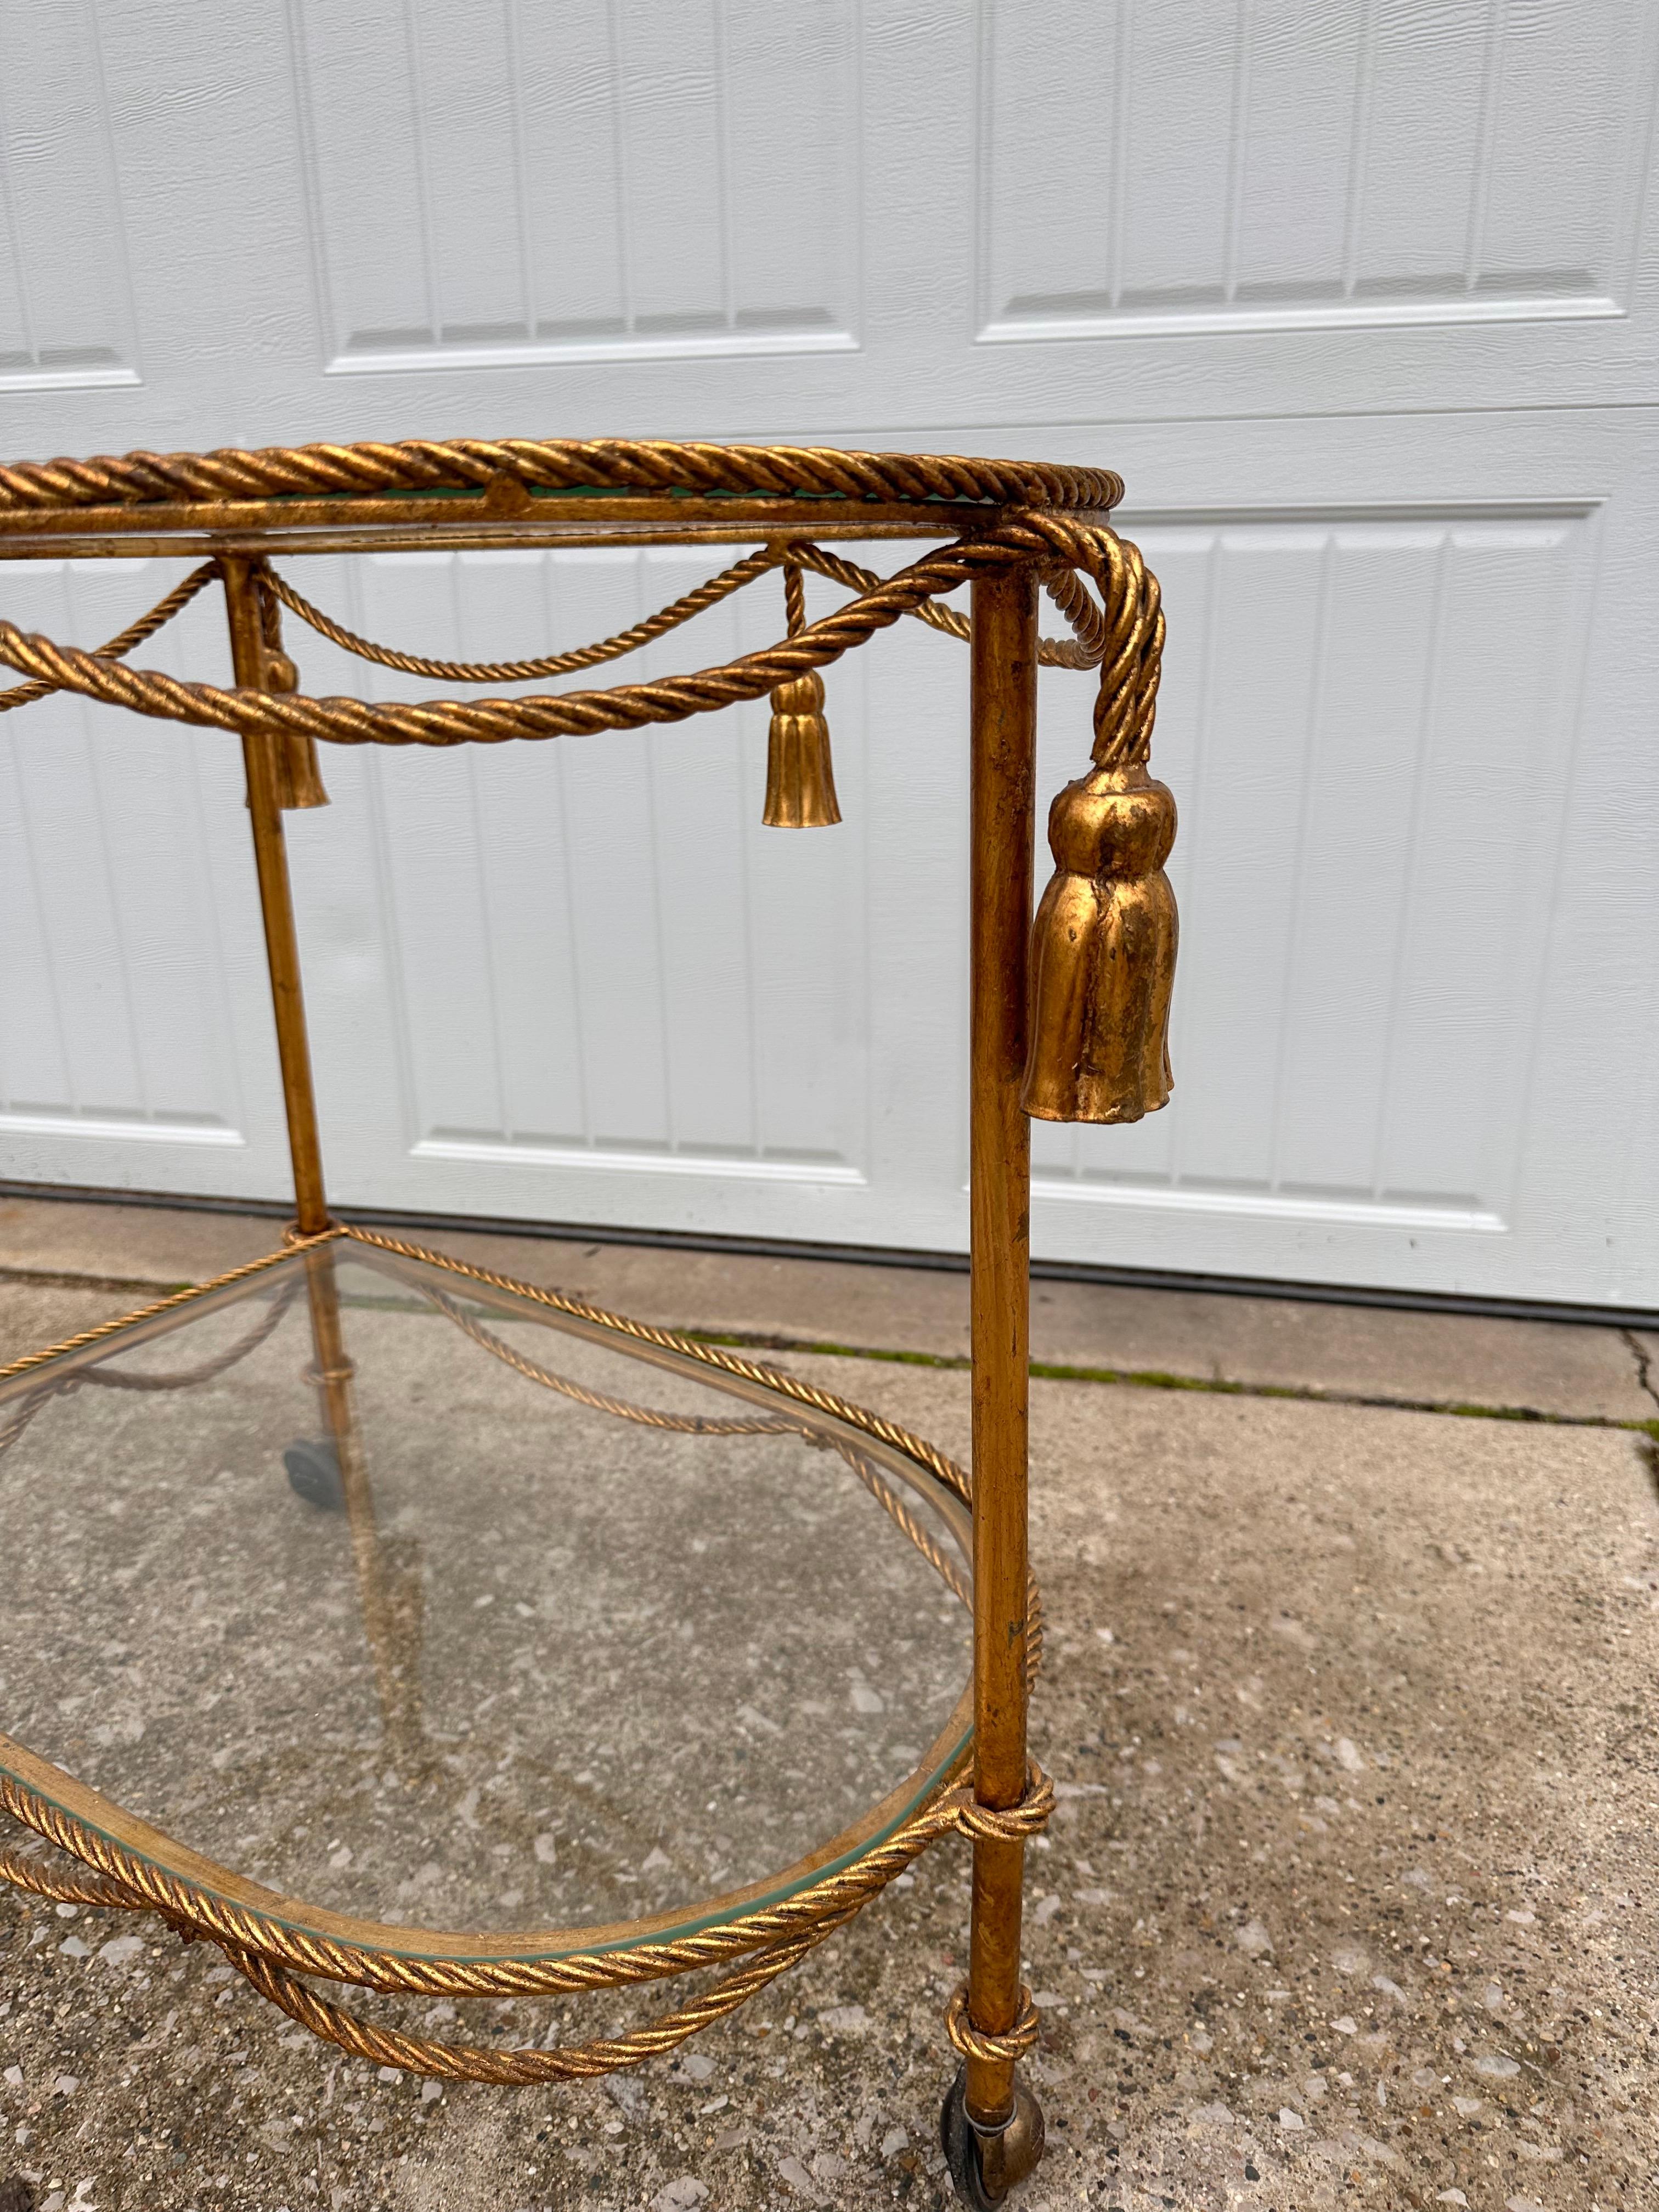 20th Century 1950s Italian Gilded Two Tiered Bar Cart Hollywood Regency Style with Tassels